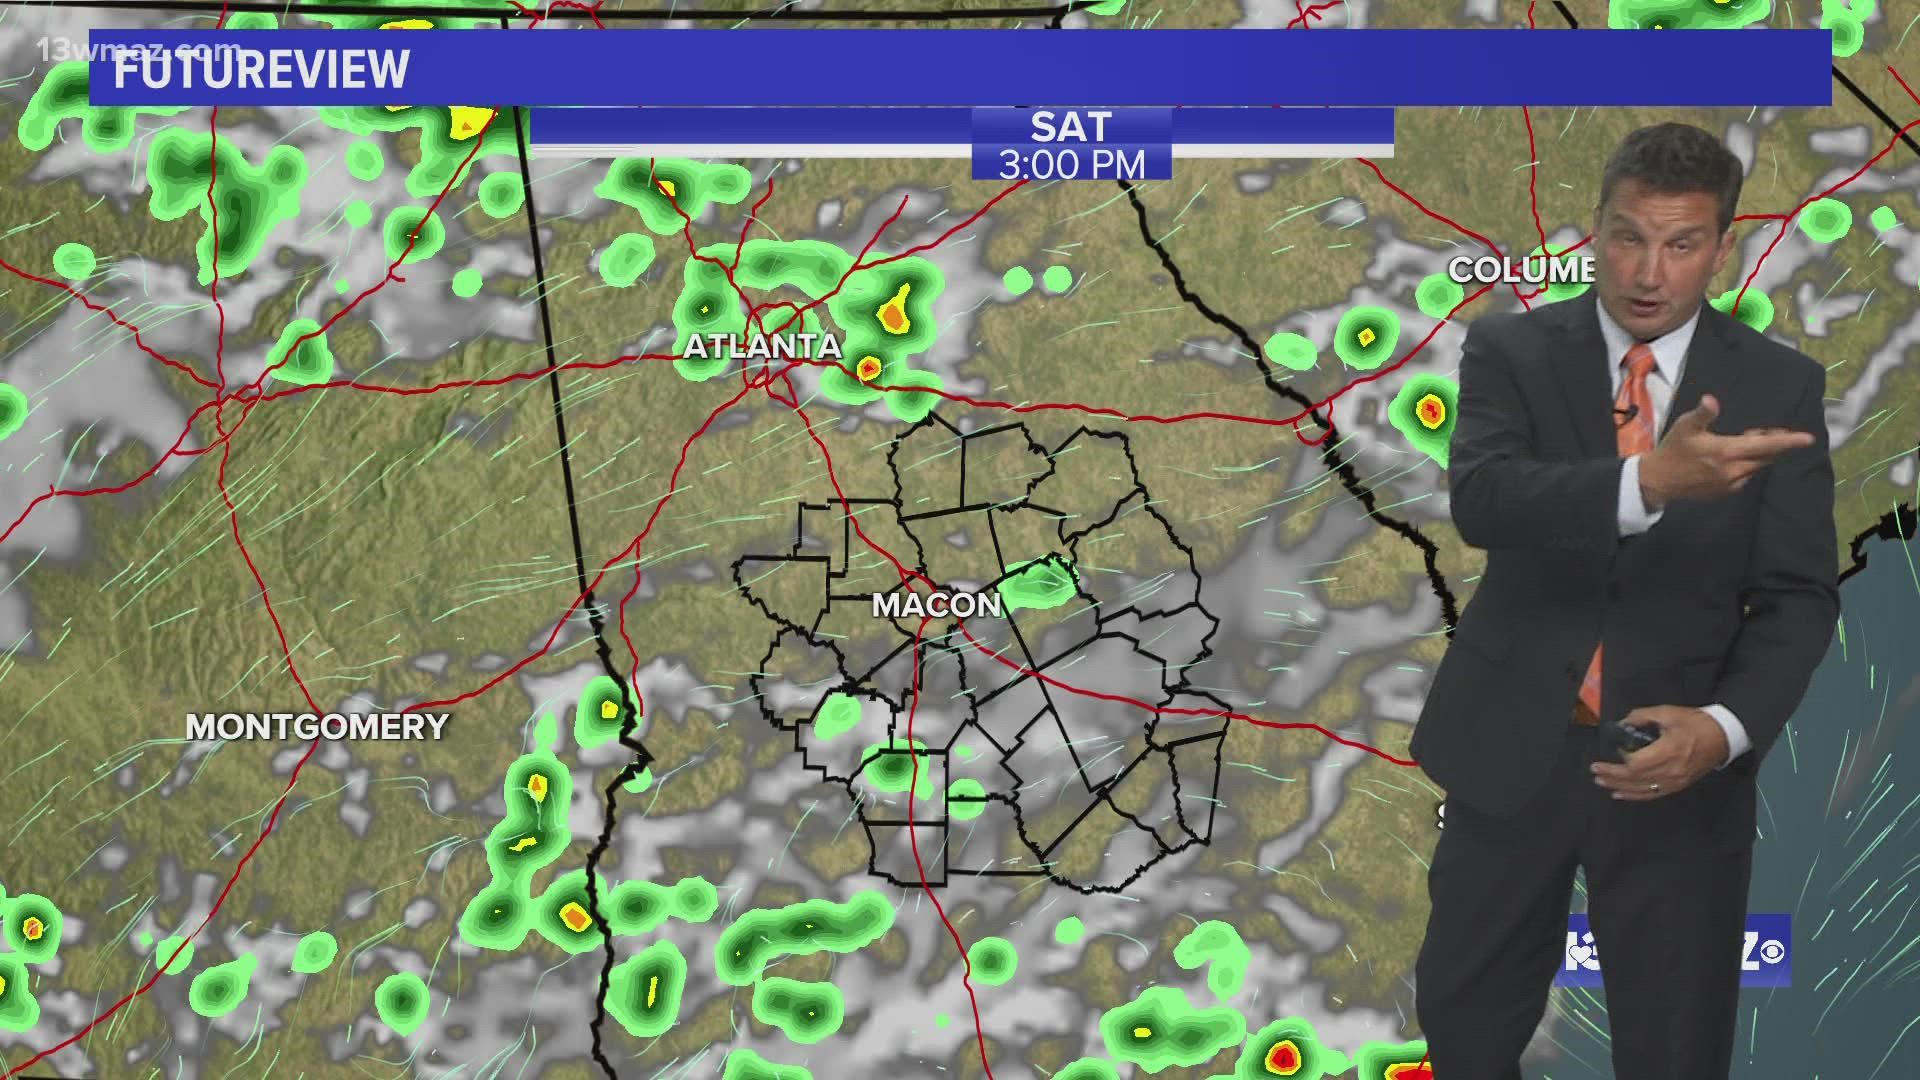 More rounds of organized showers and storms will be possible as we get closer to the weekend